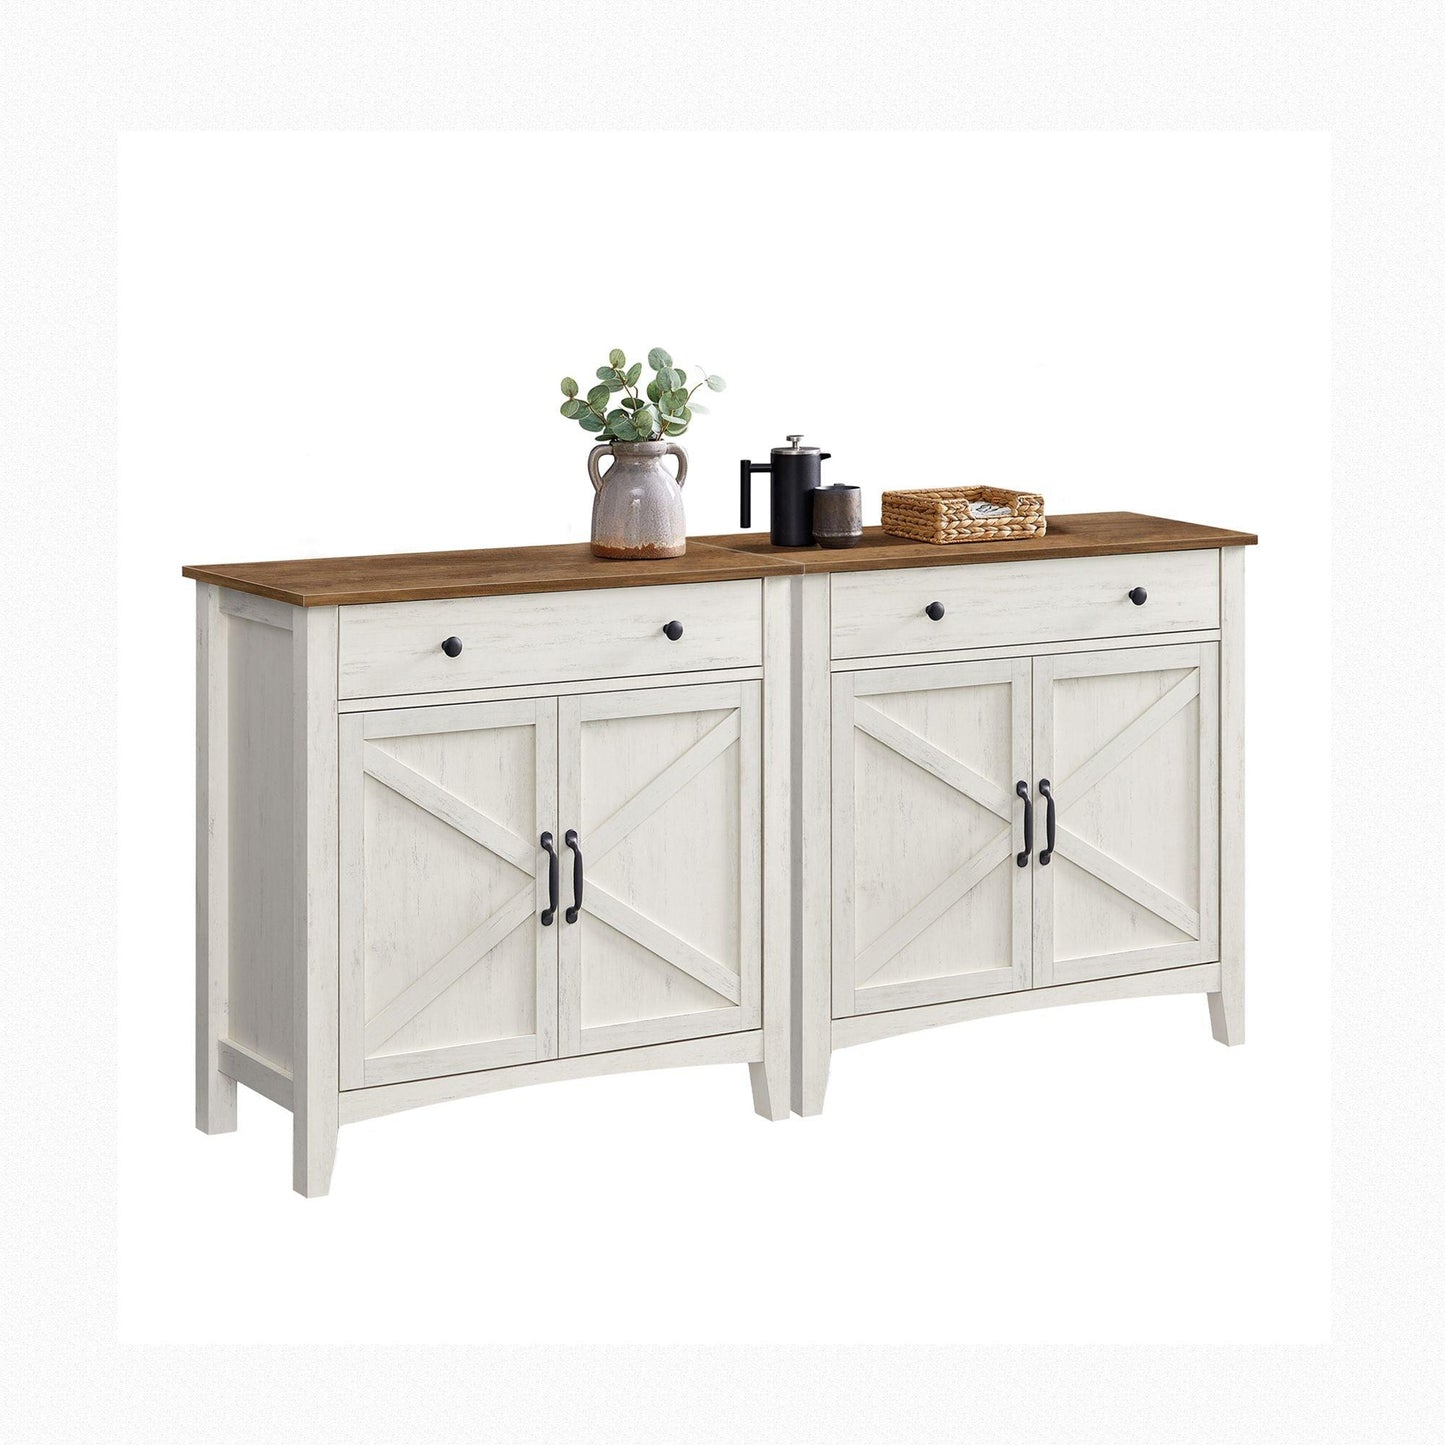 Buffet Cabinet Set of 2, Sideboard Cabinets with Storage and Drawer, with Doors, Height Adjustable Shelf